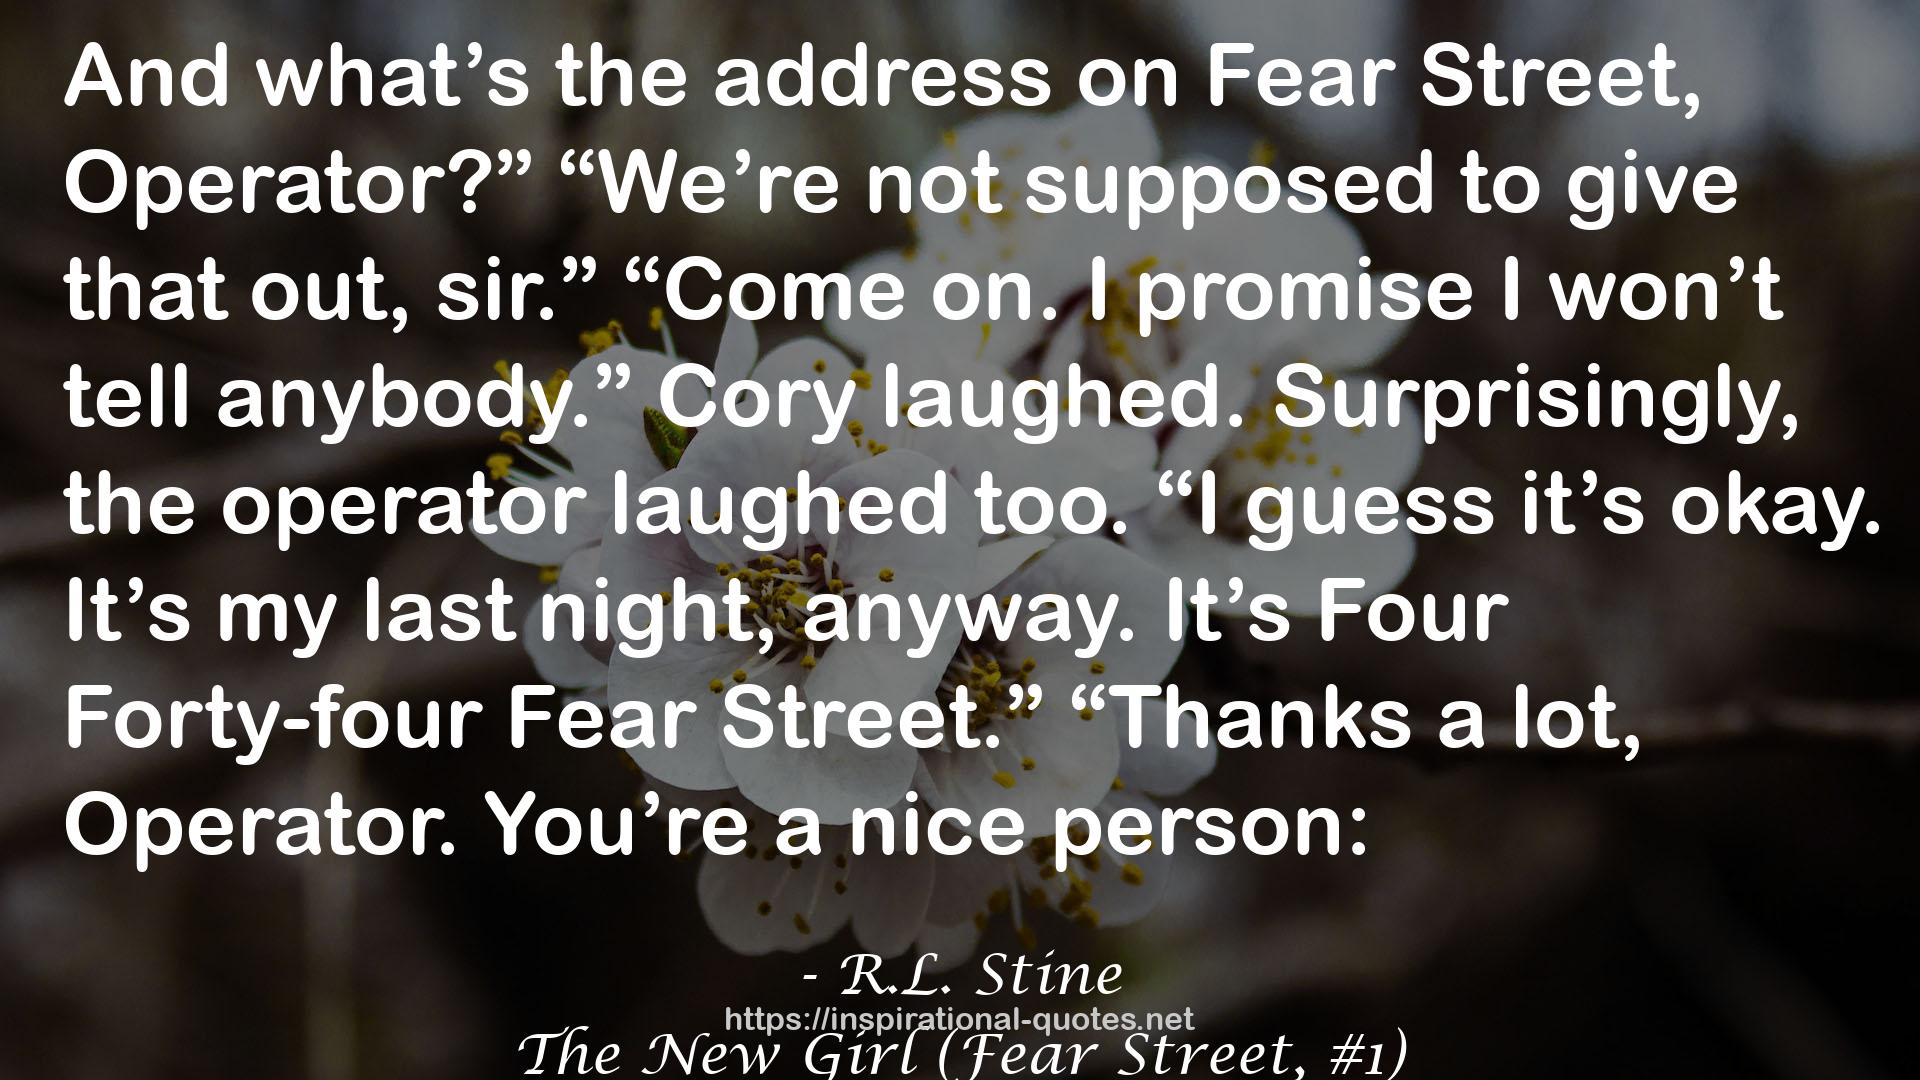 The New Girl (Fear Street, #1) QUOTES